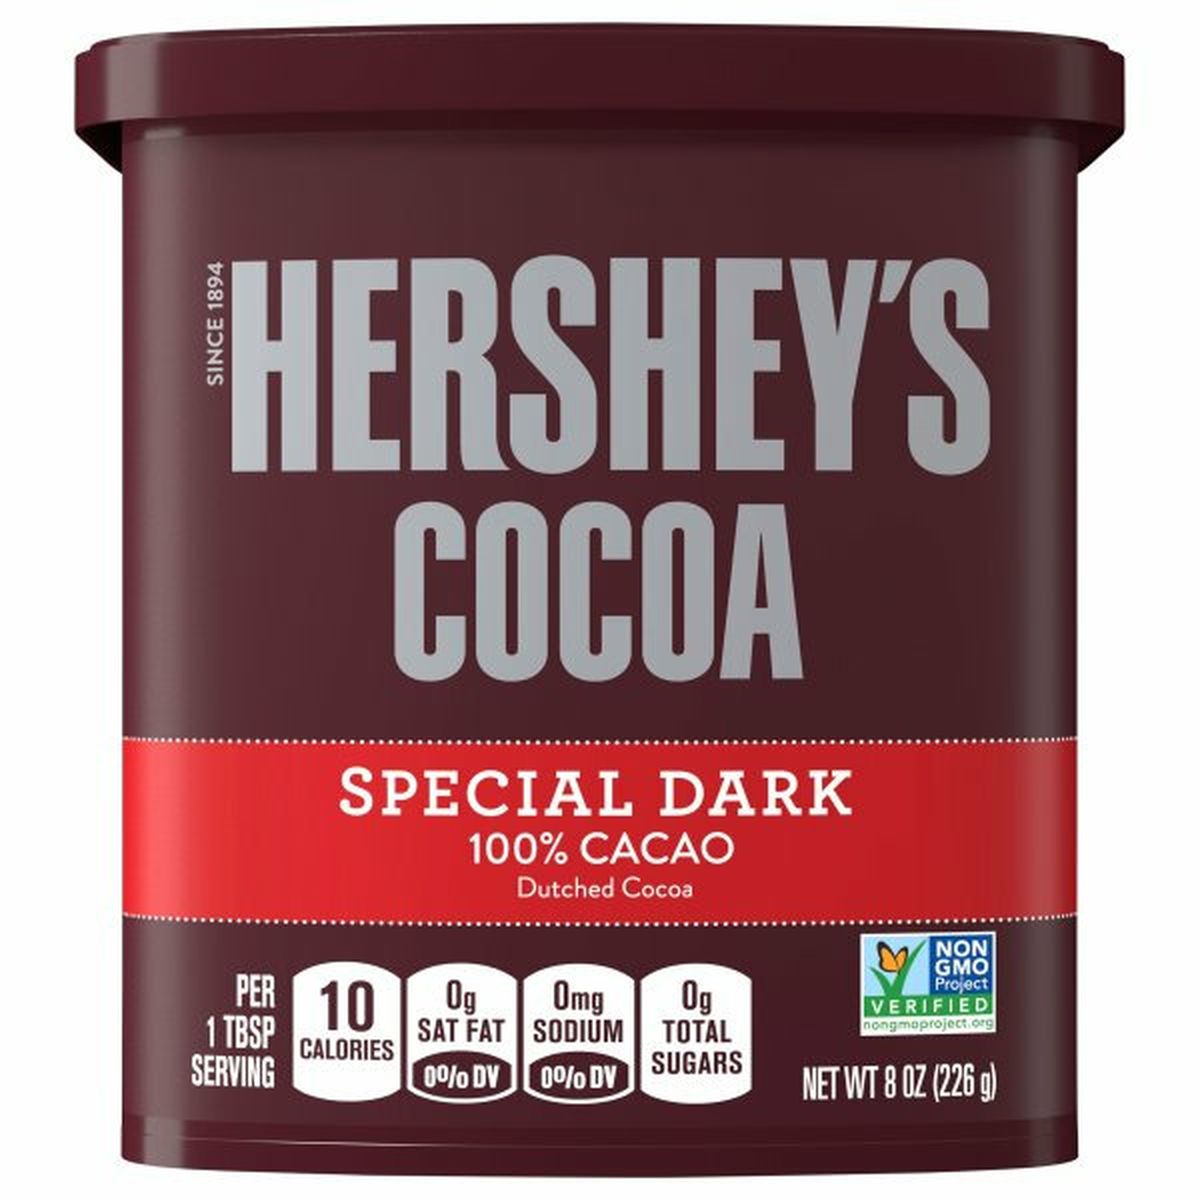 Calories in Hershey's Dutched Cocoa, Special Dark, 100% Cacao